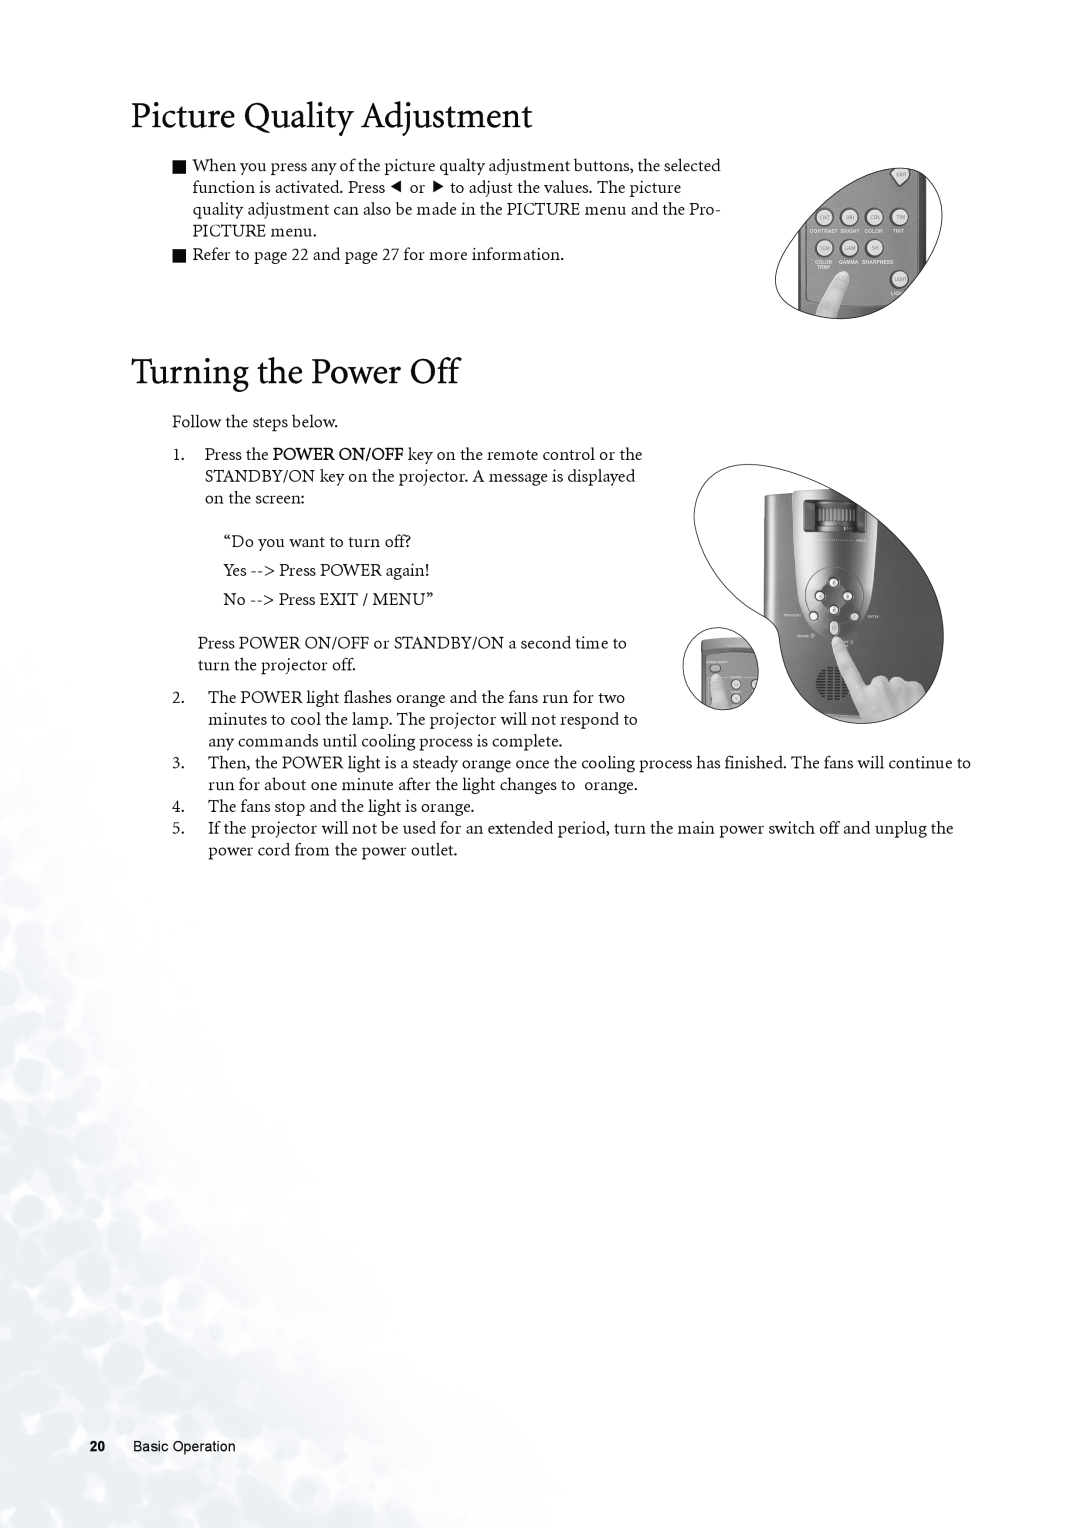 BenQ PE6800 user manual Picture Quality Adjustment, Turning the Power Off 